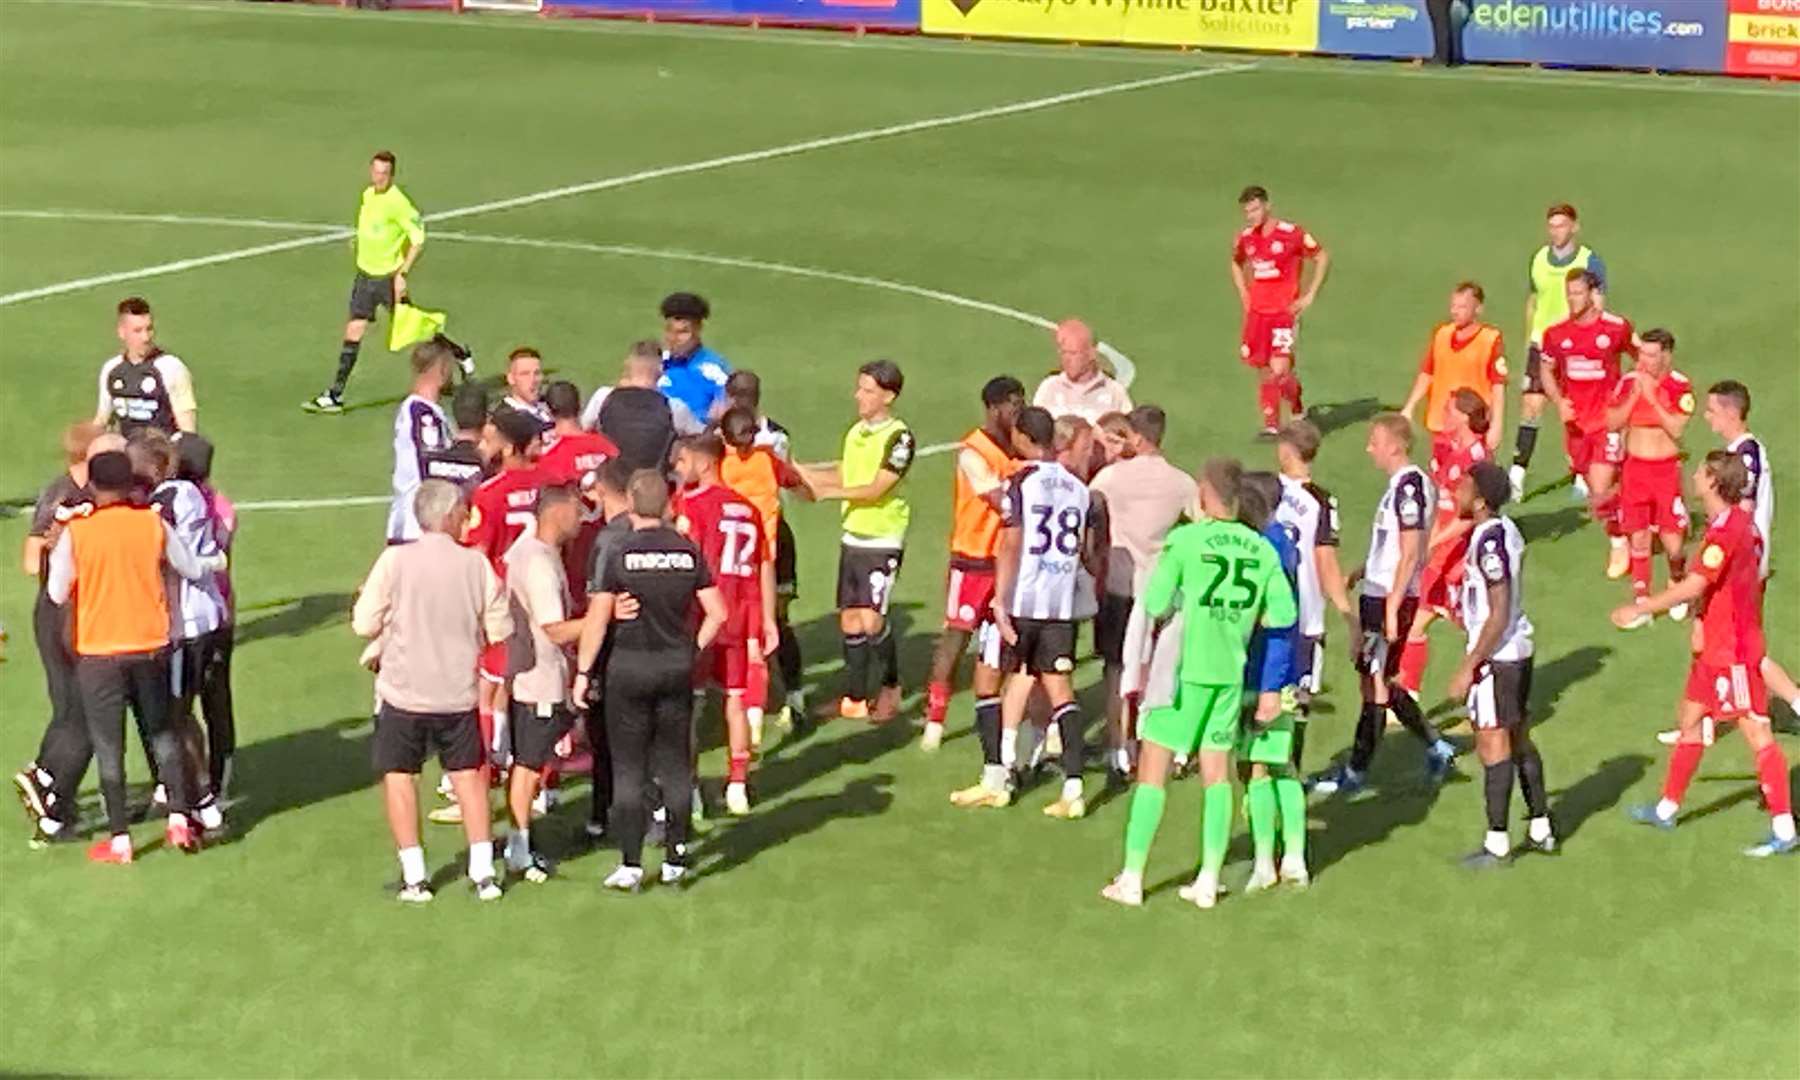 Gillingham assistant David Livermore was booked by the referee after the final whistle